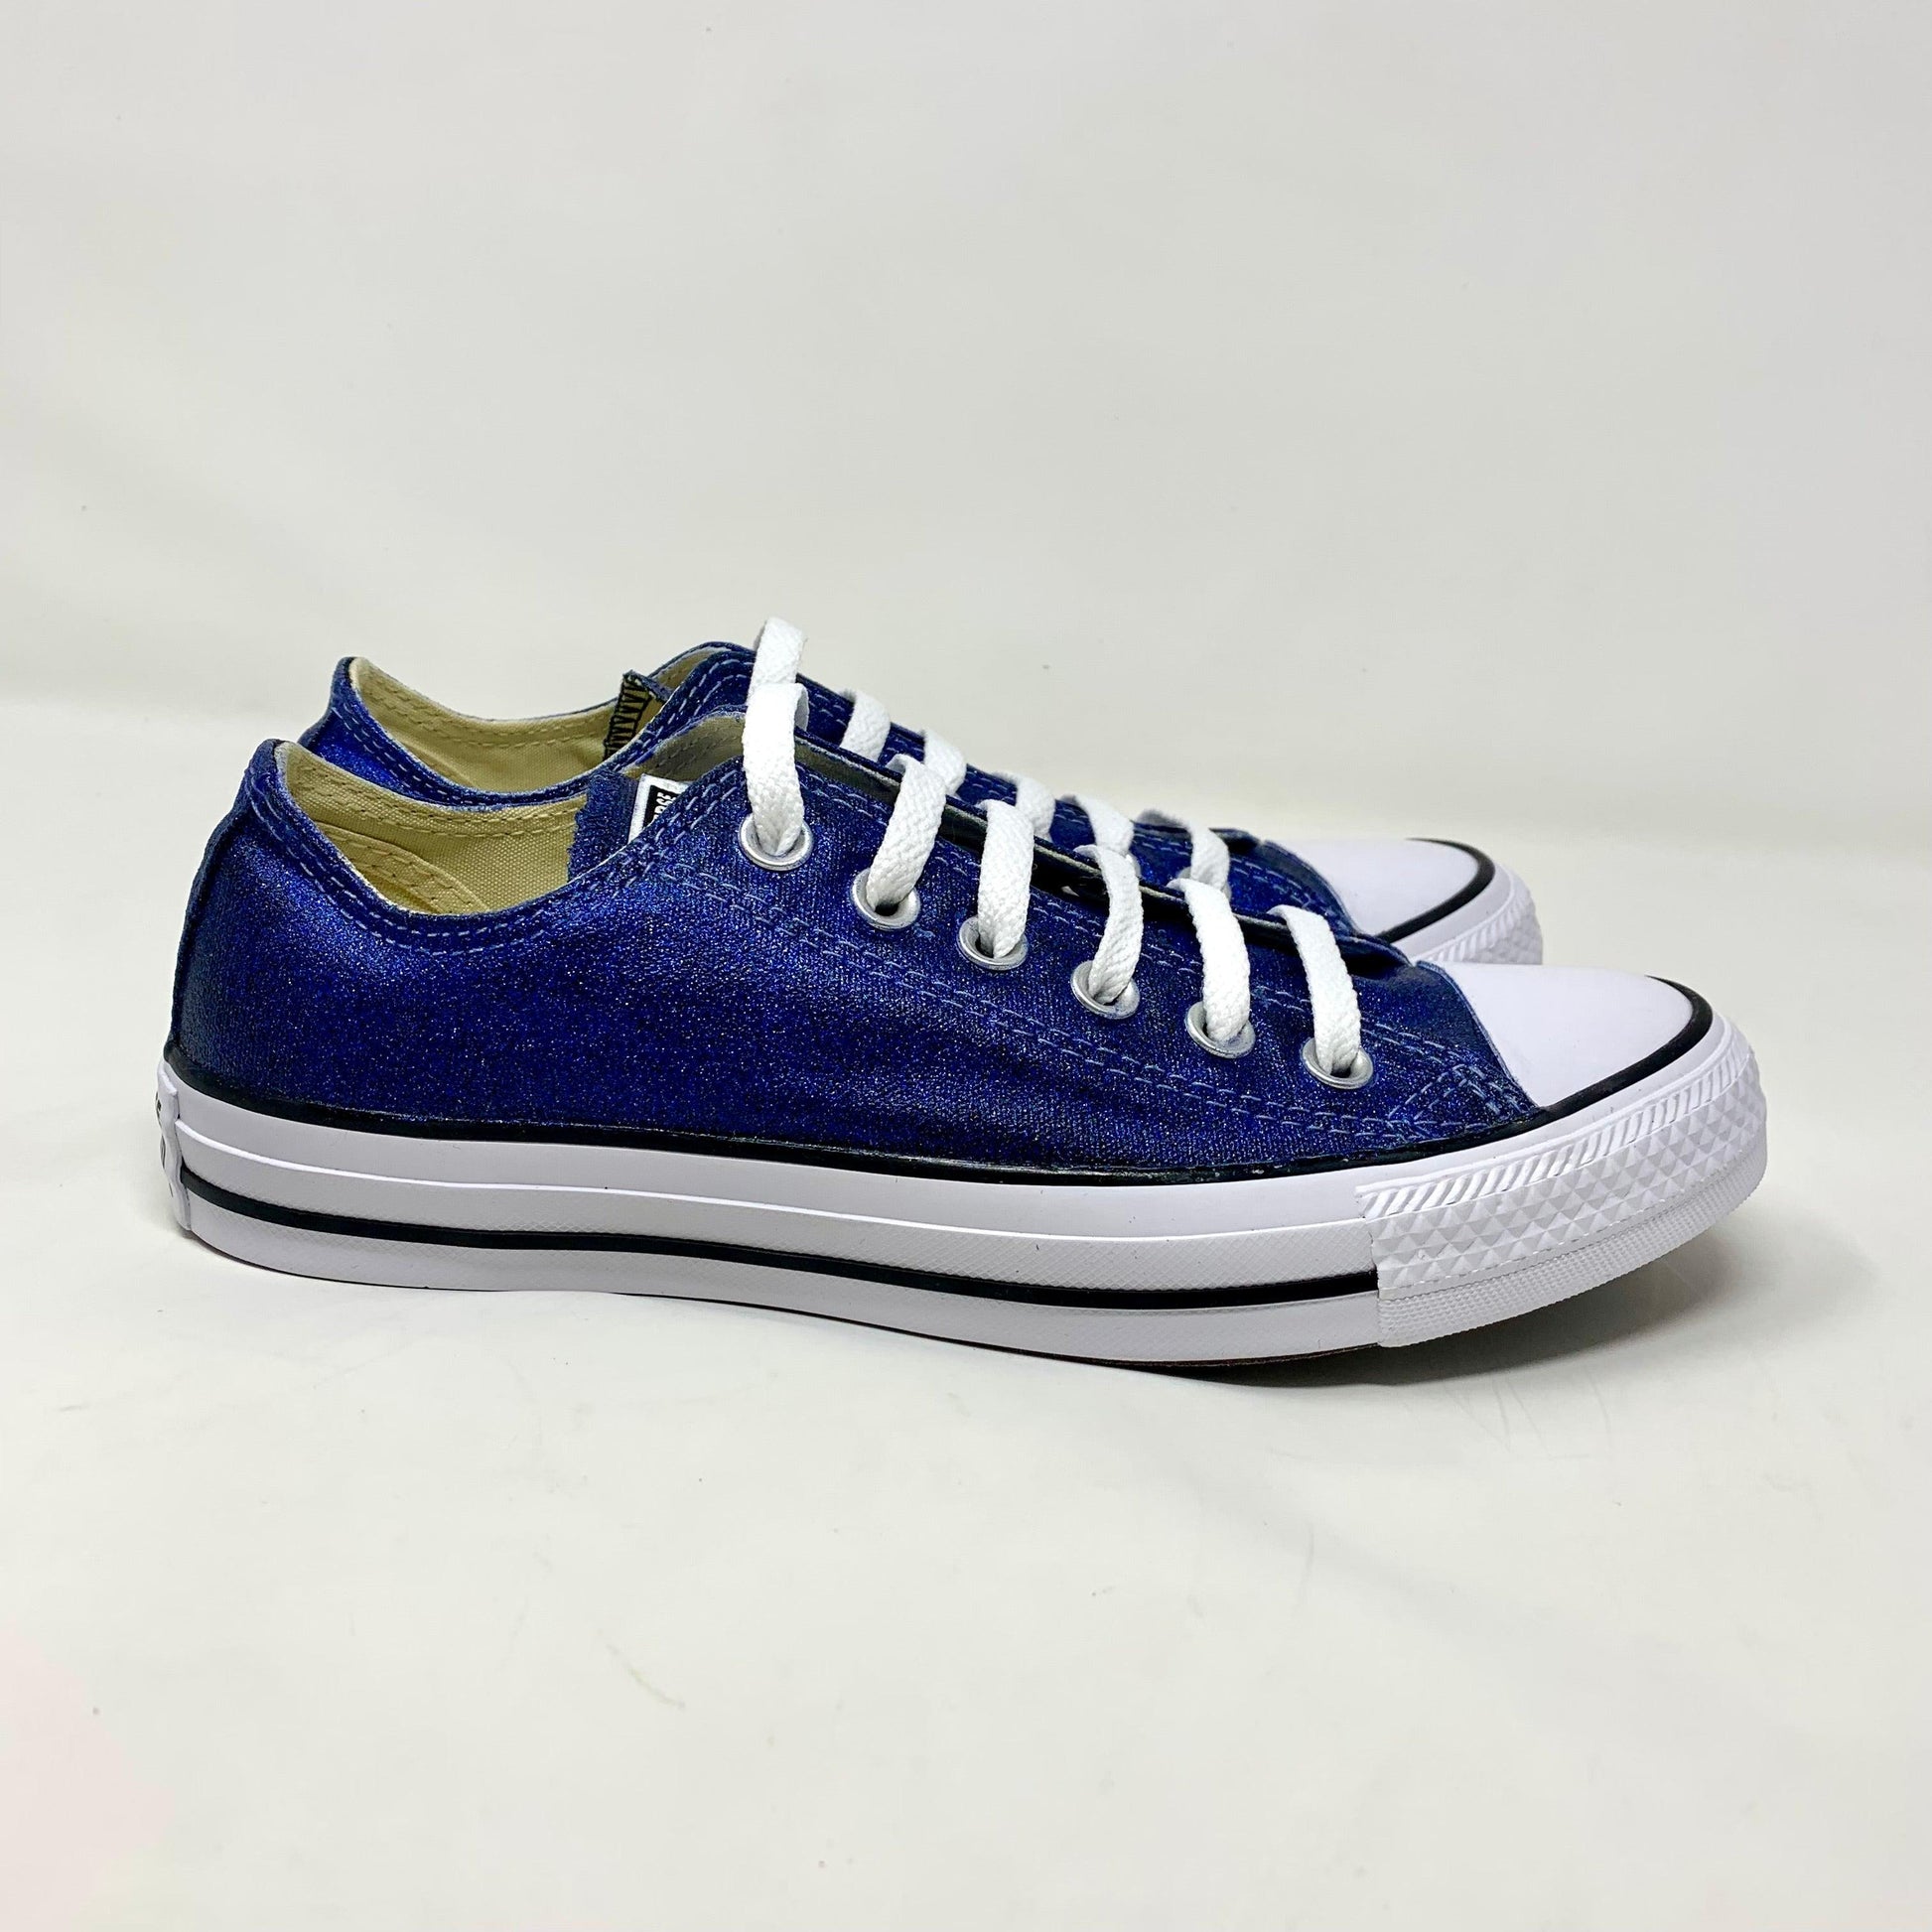 Navy Glitter Converse - ButterMakesMeHappy